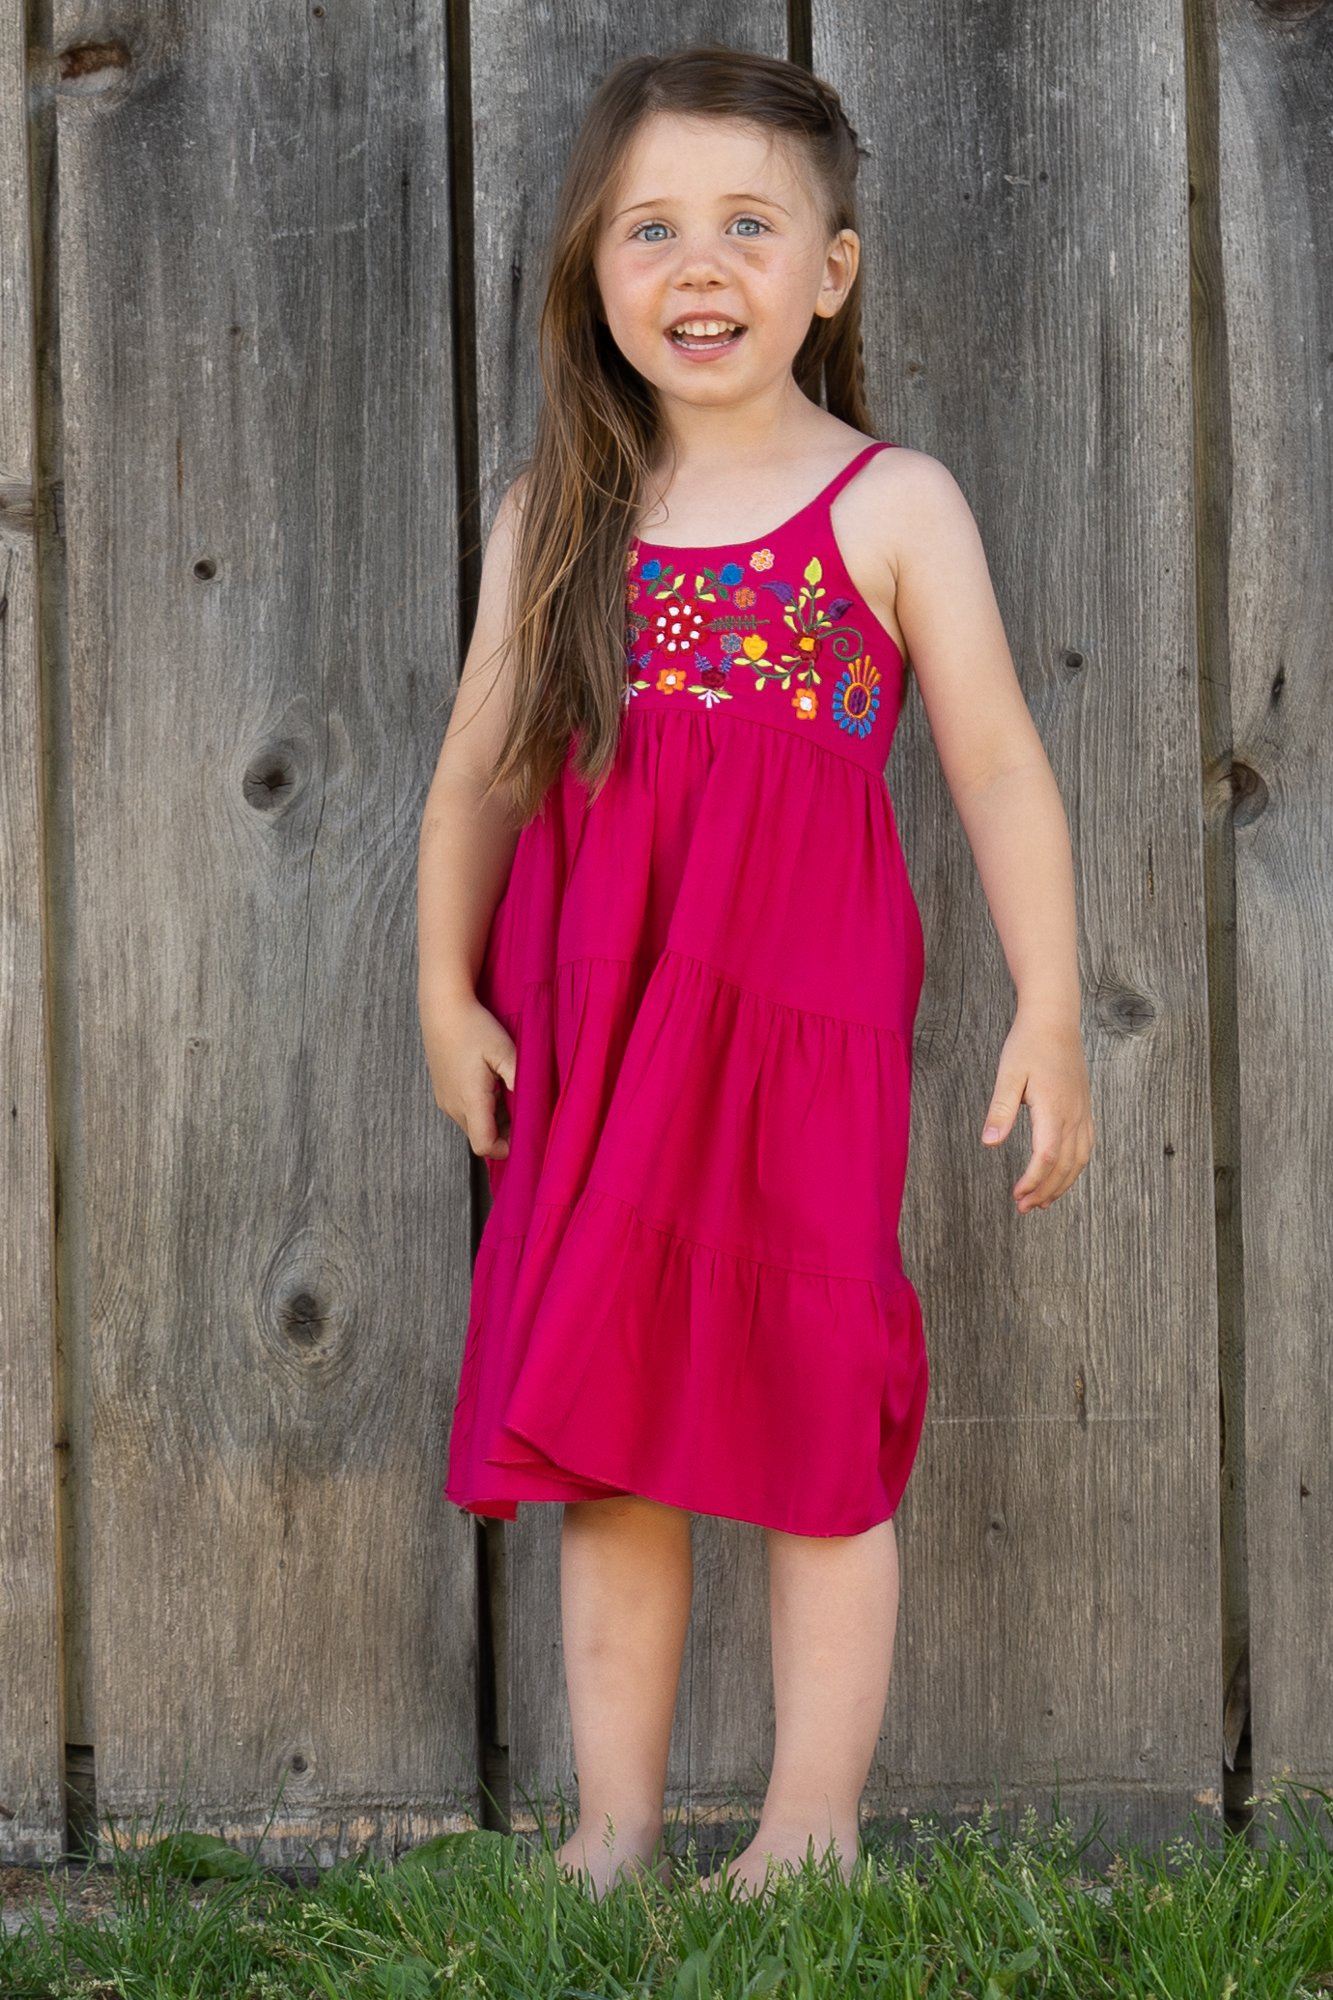 colorful embroidered floral dress for girls in pink 